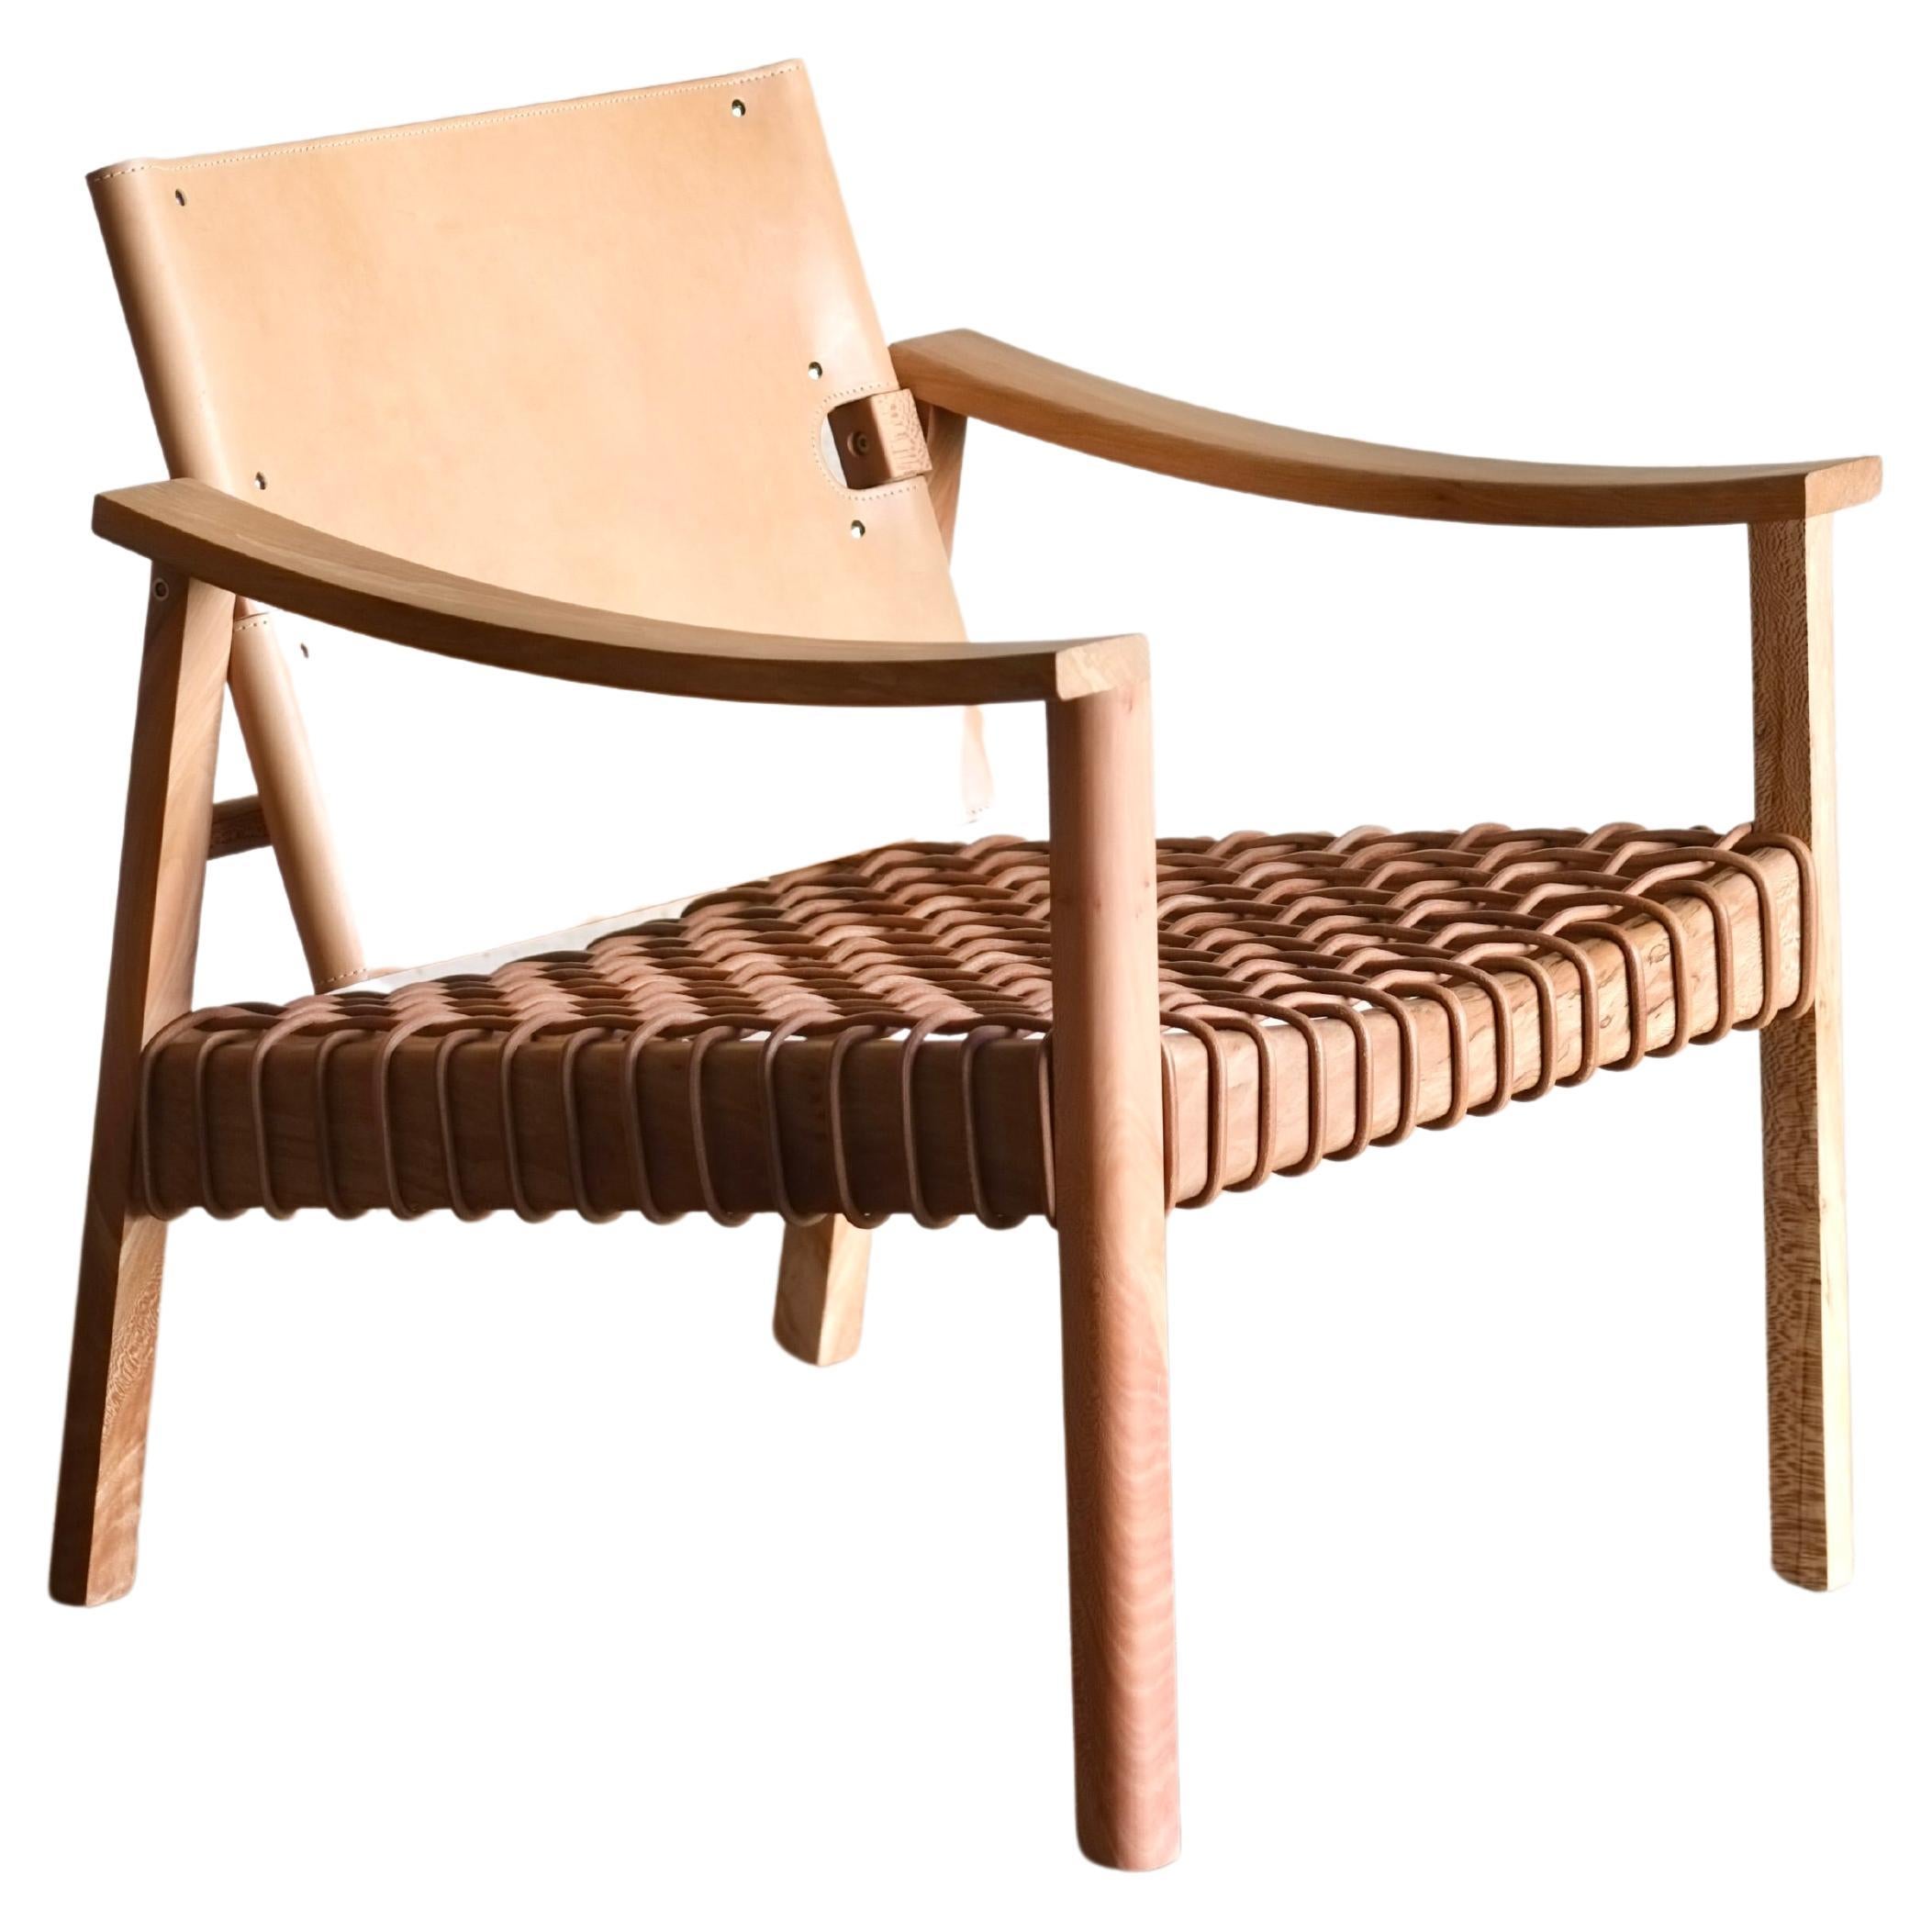 Camber Reading Chair - Woven leather cord and Russet bridle leather For Sale